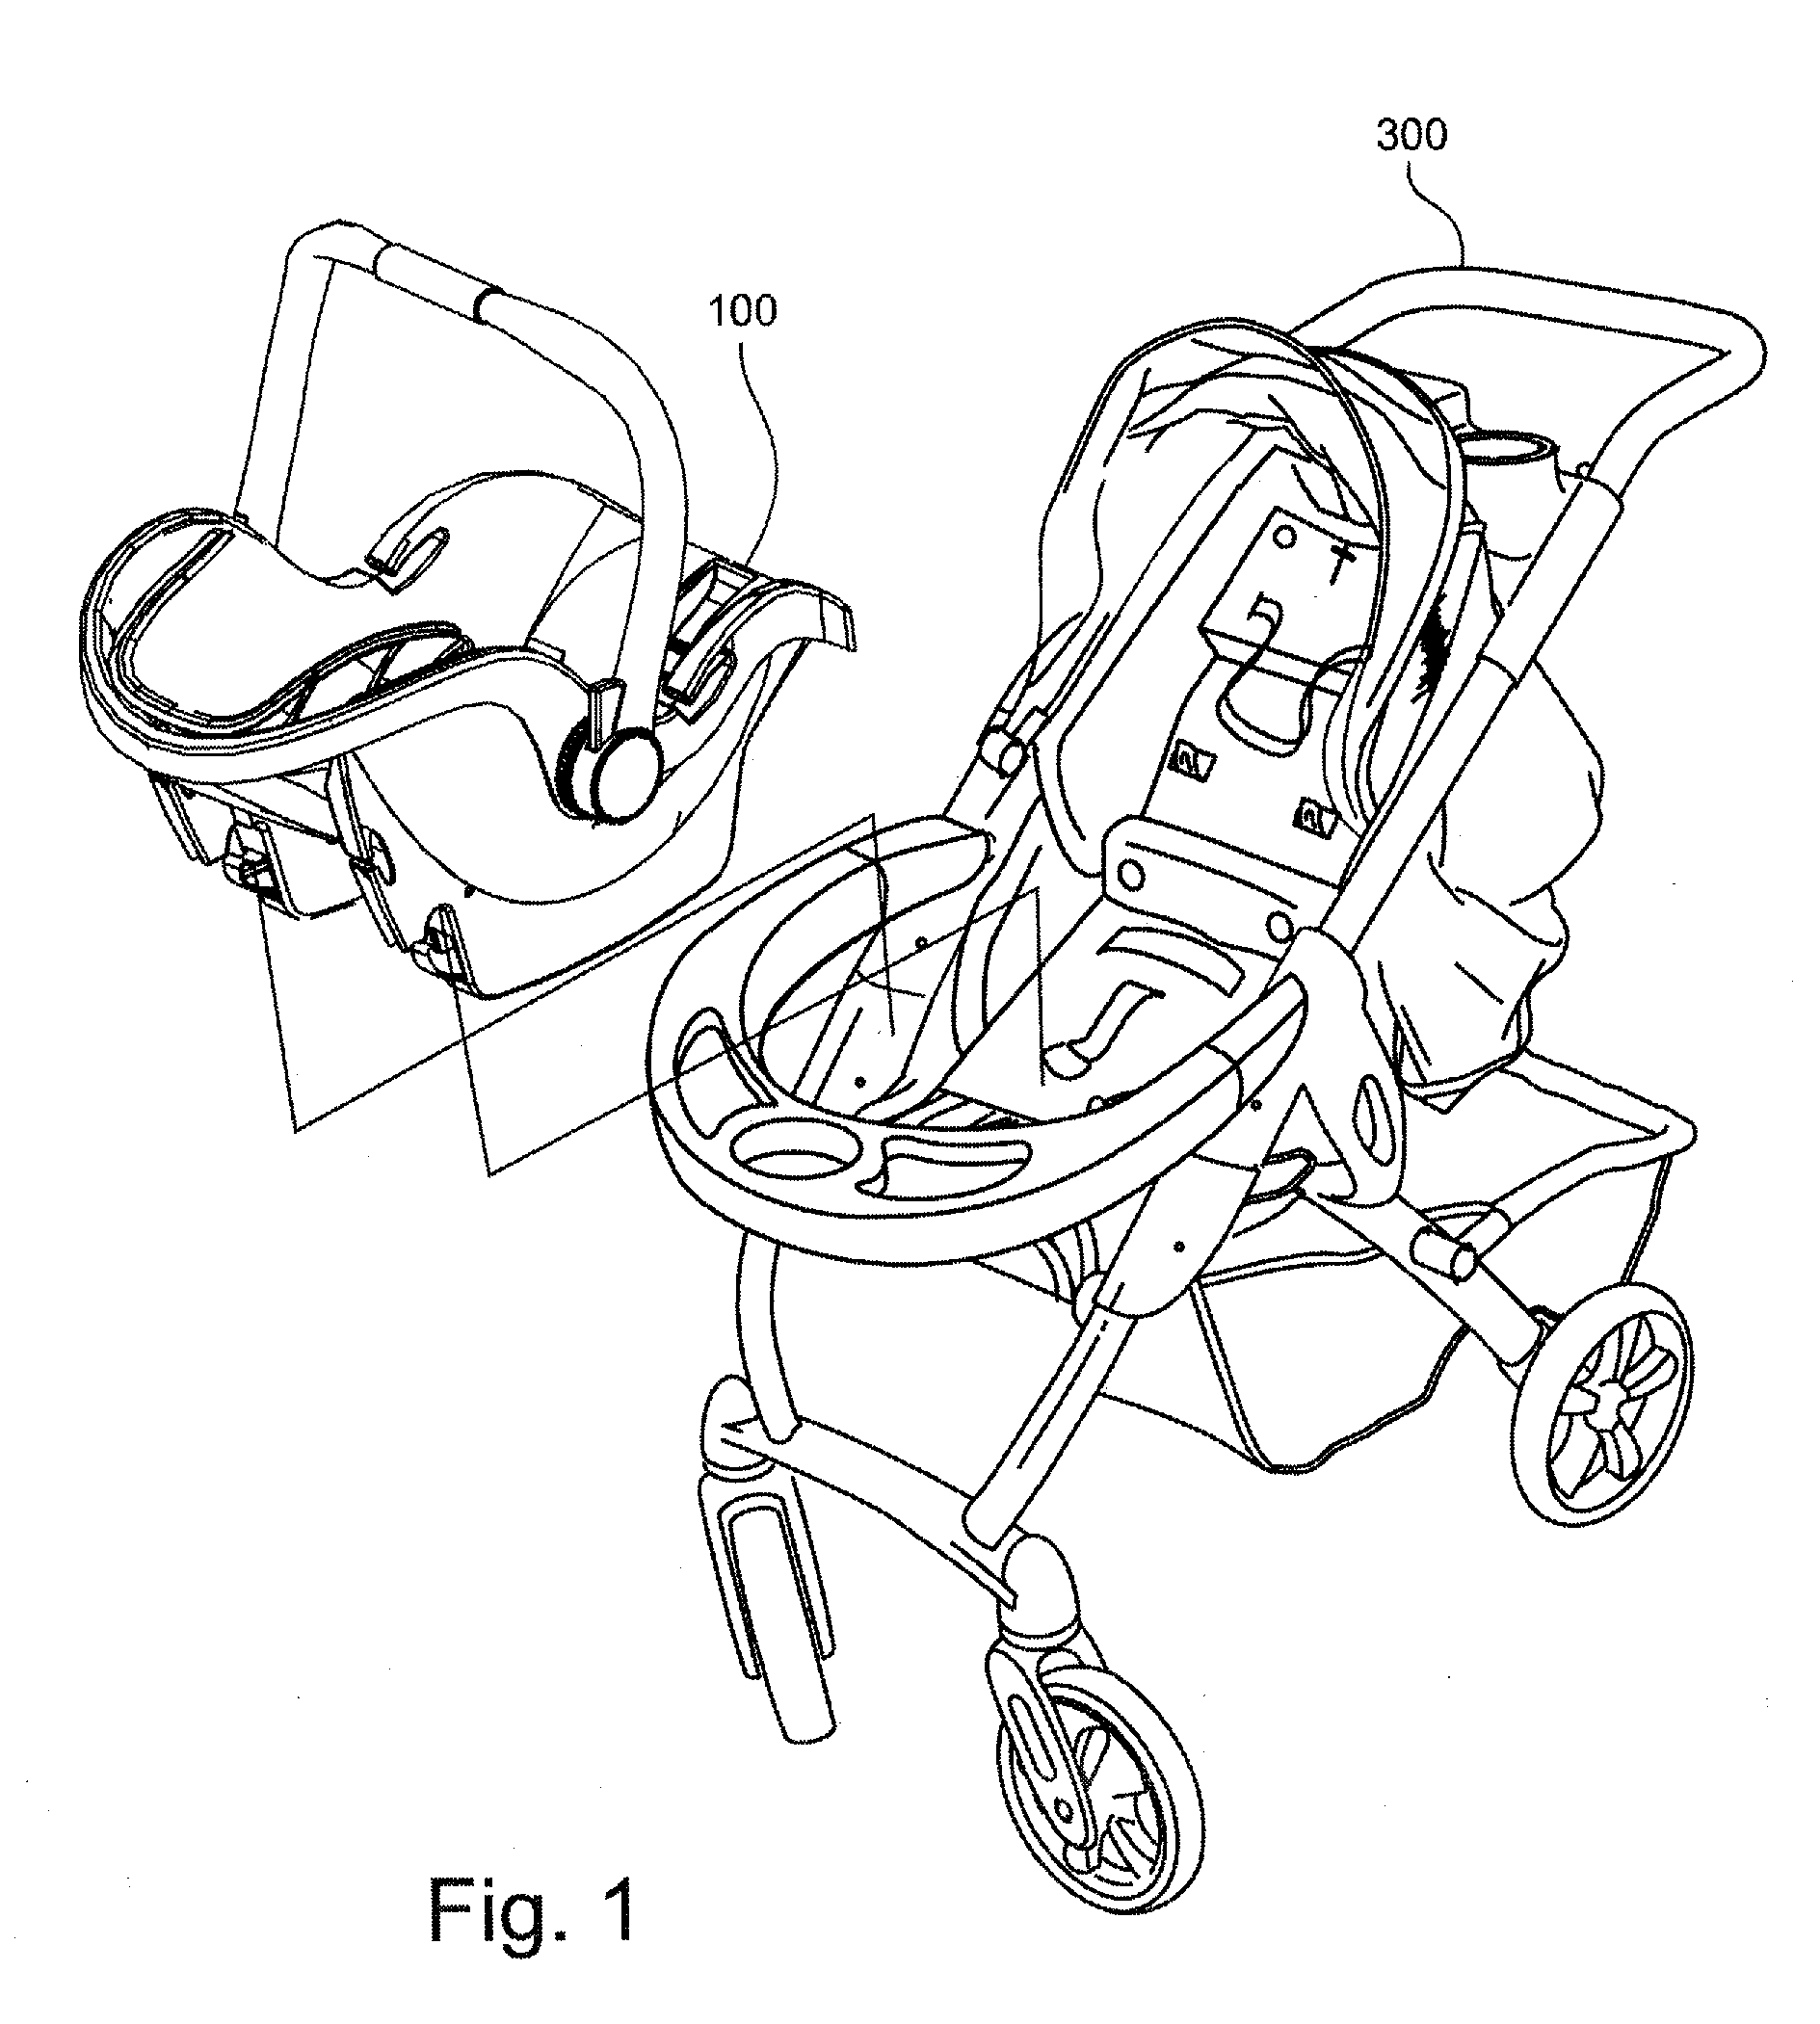 Stroller, child safety seat and child safety system